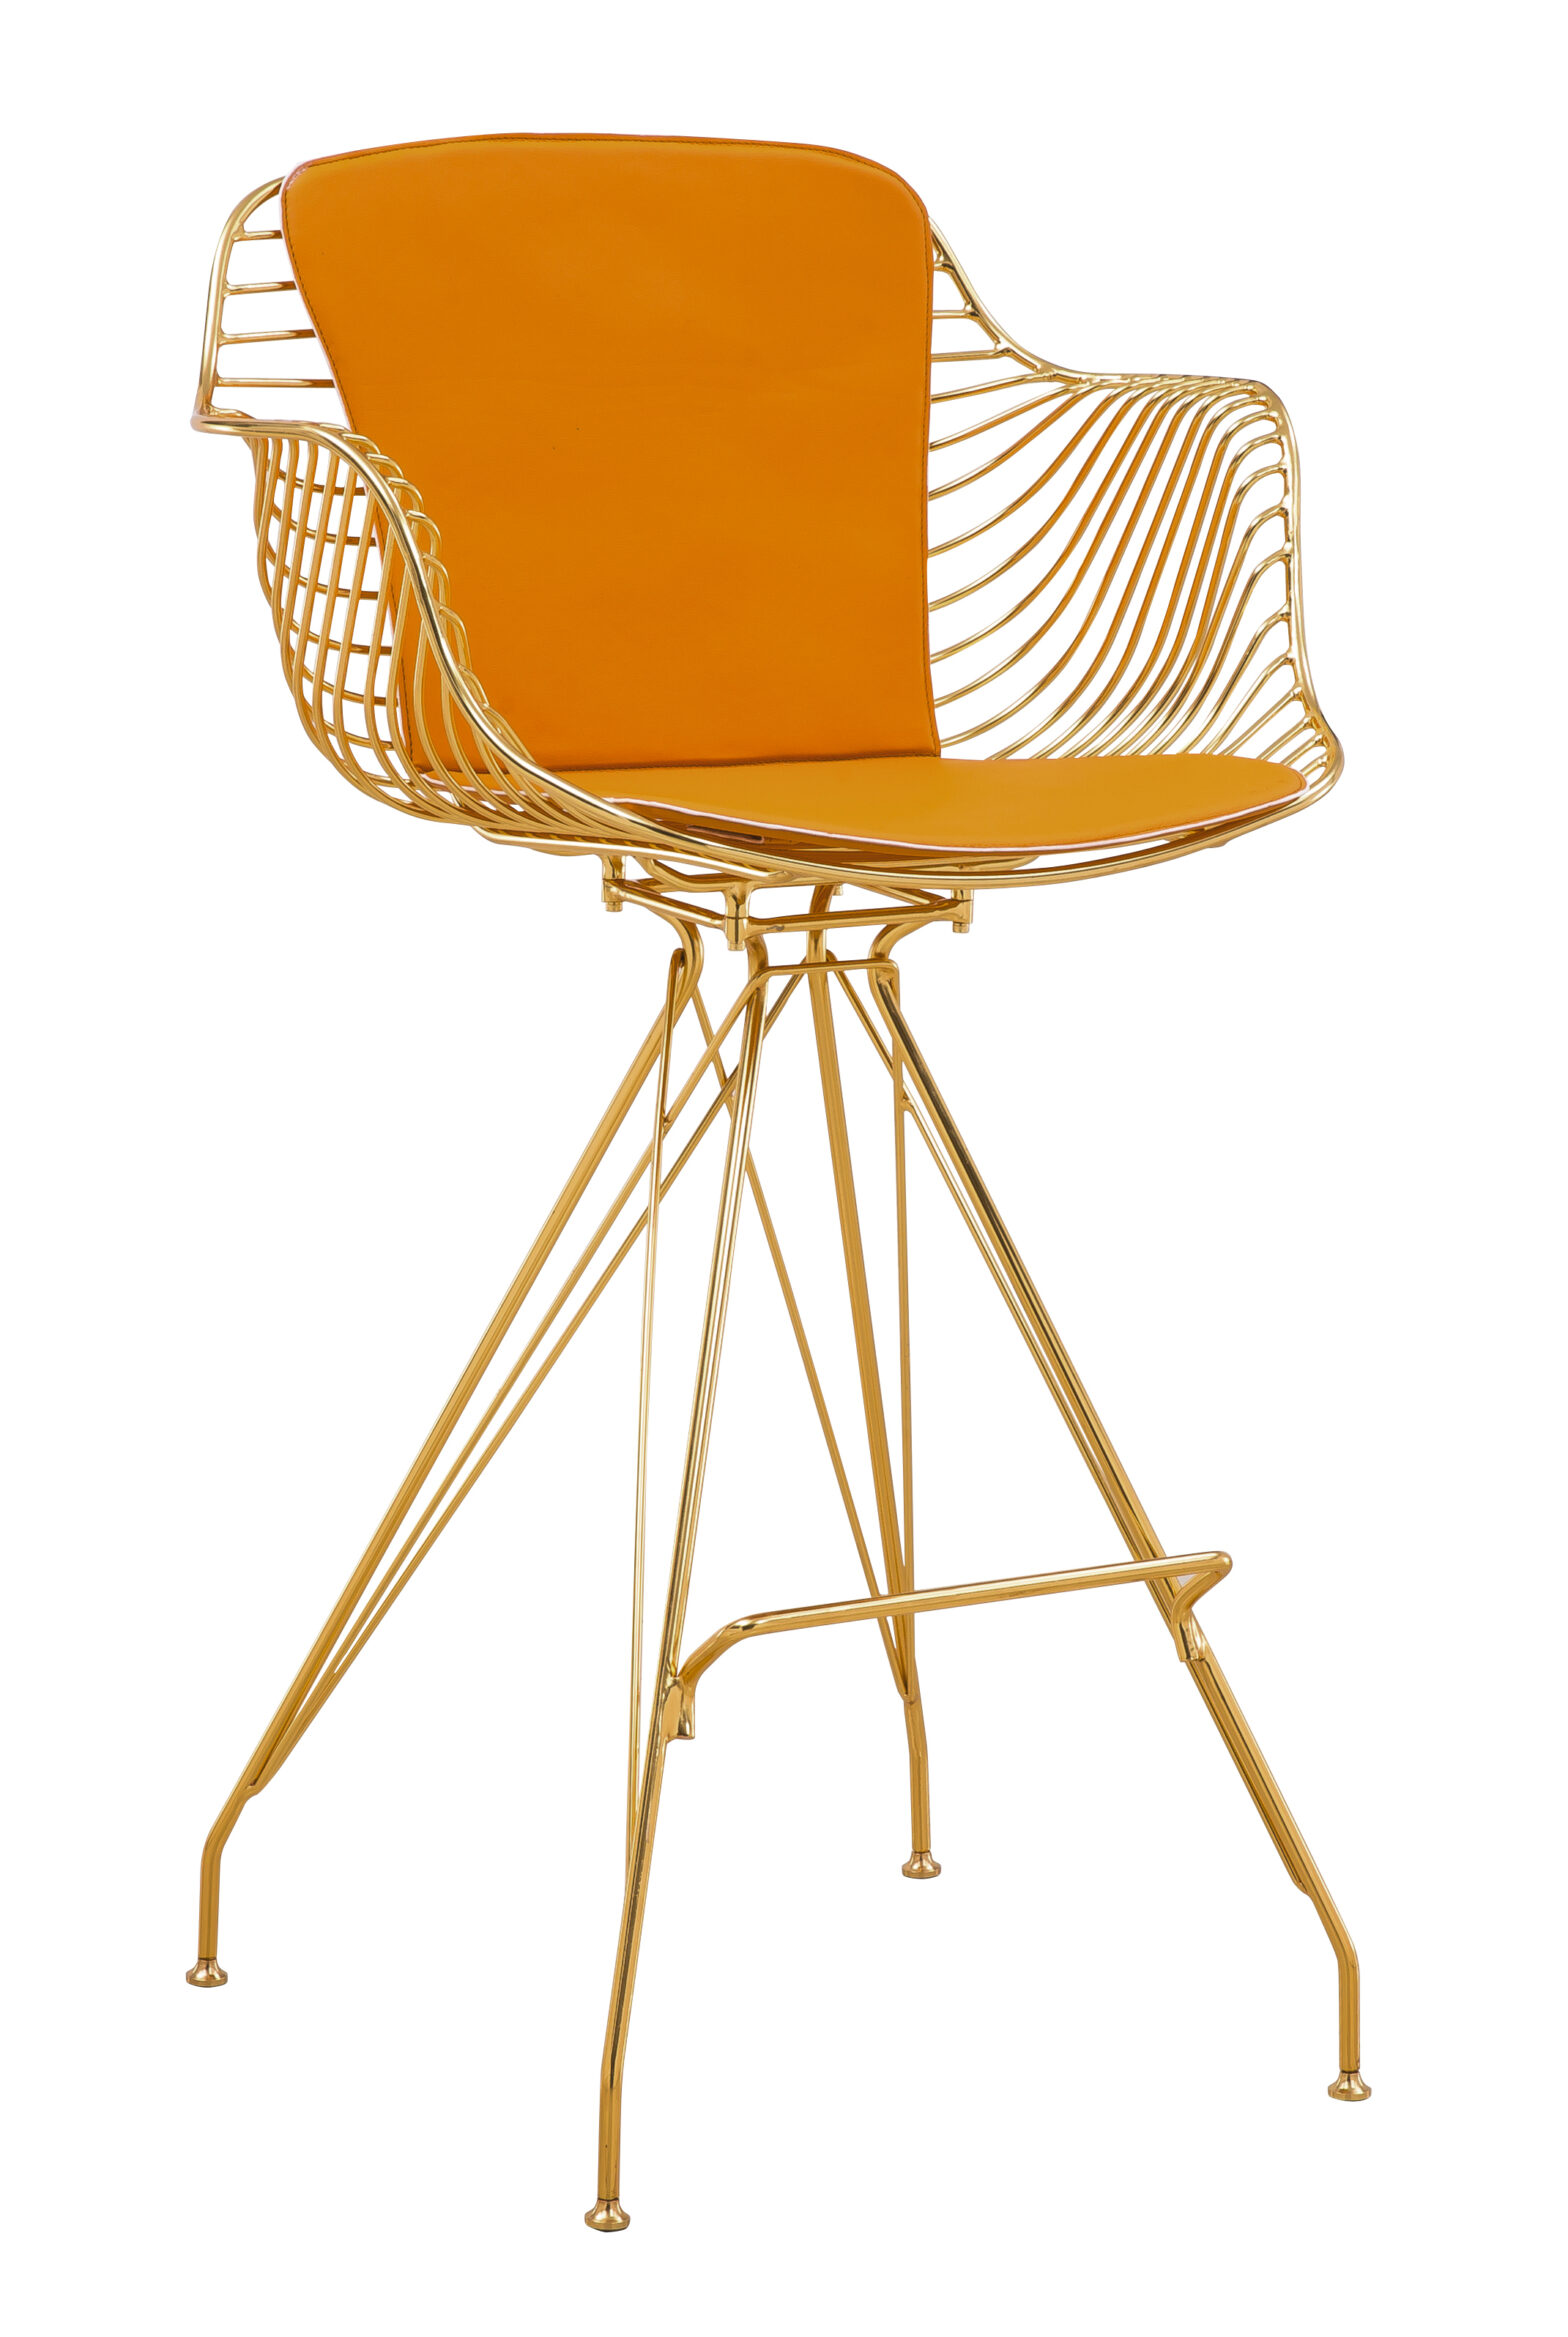 Gold electroplated metal wire barstool chair with armrest